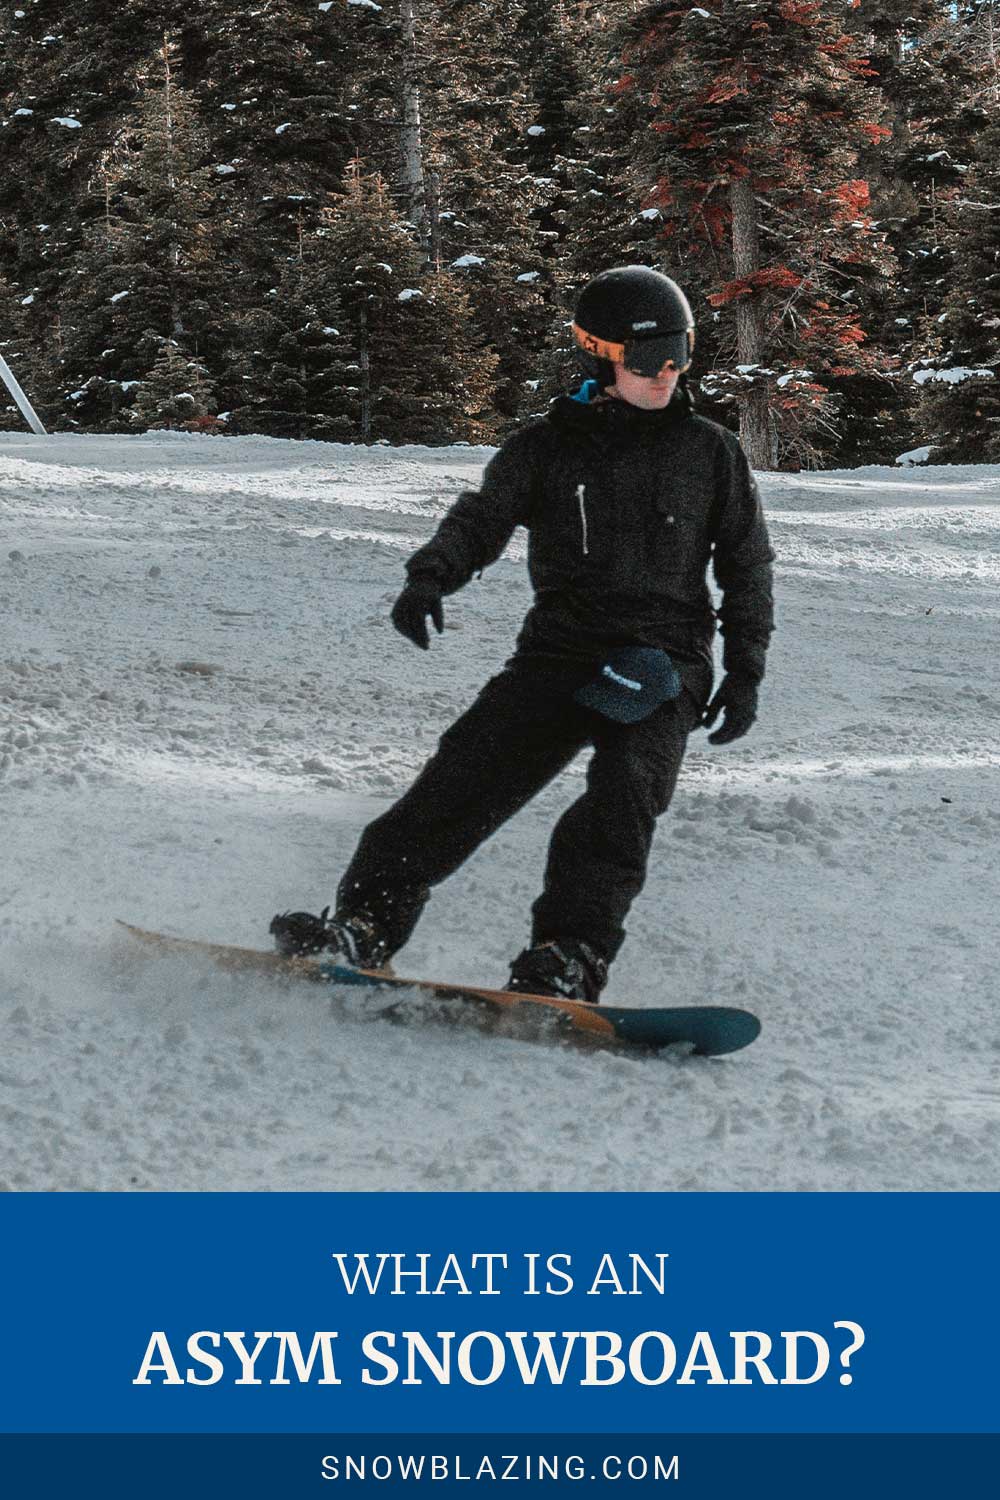 Person wearing all blacks snowboarding - What is an Asym Snowboard?